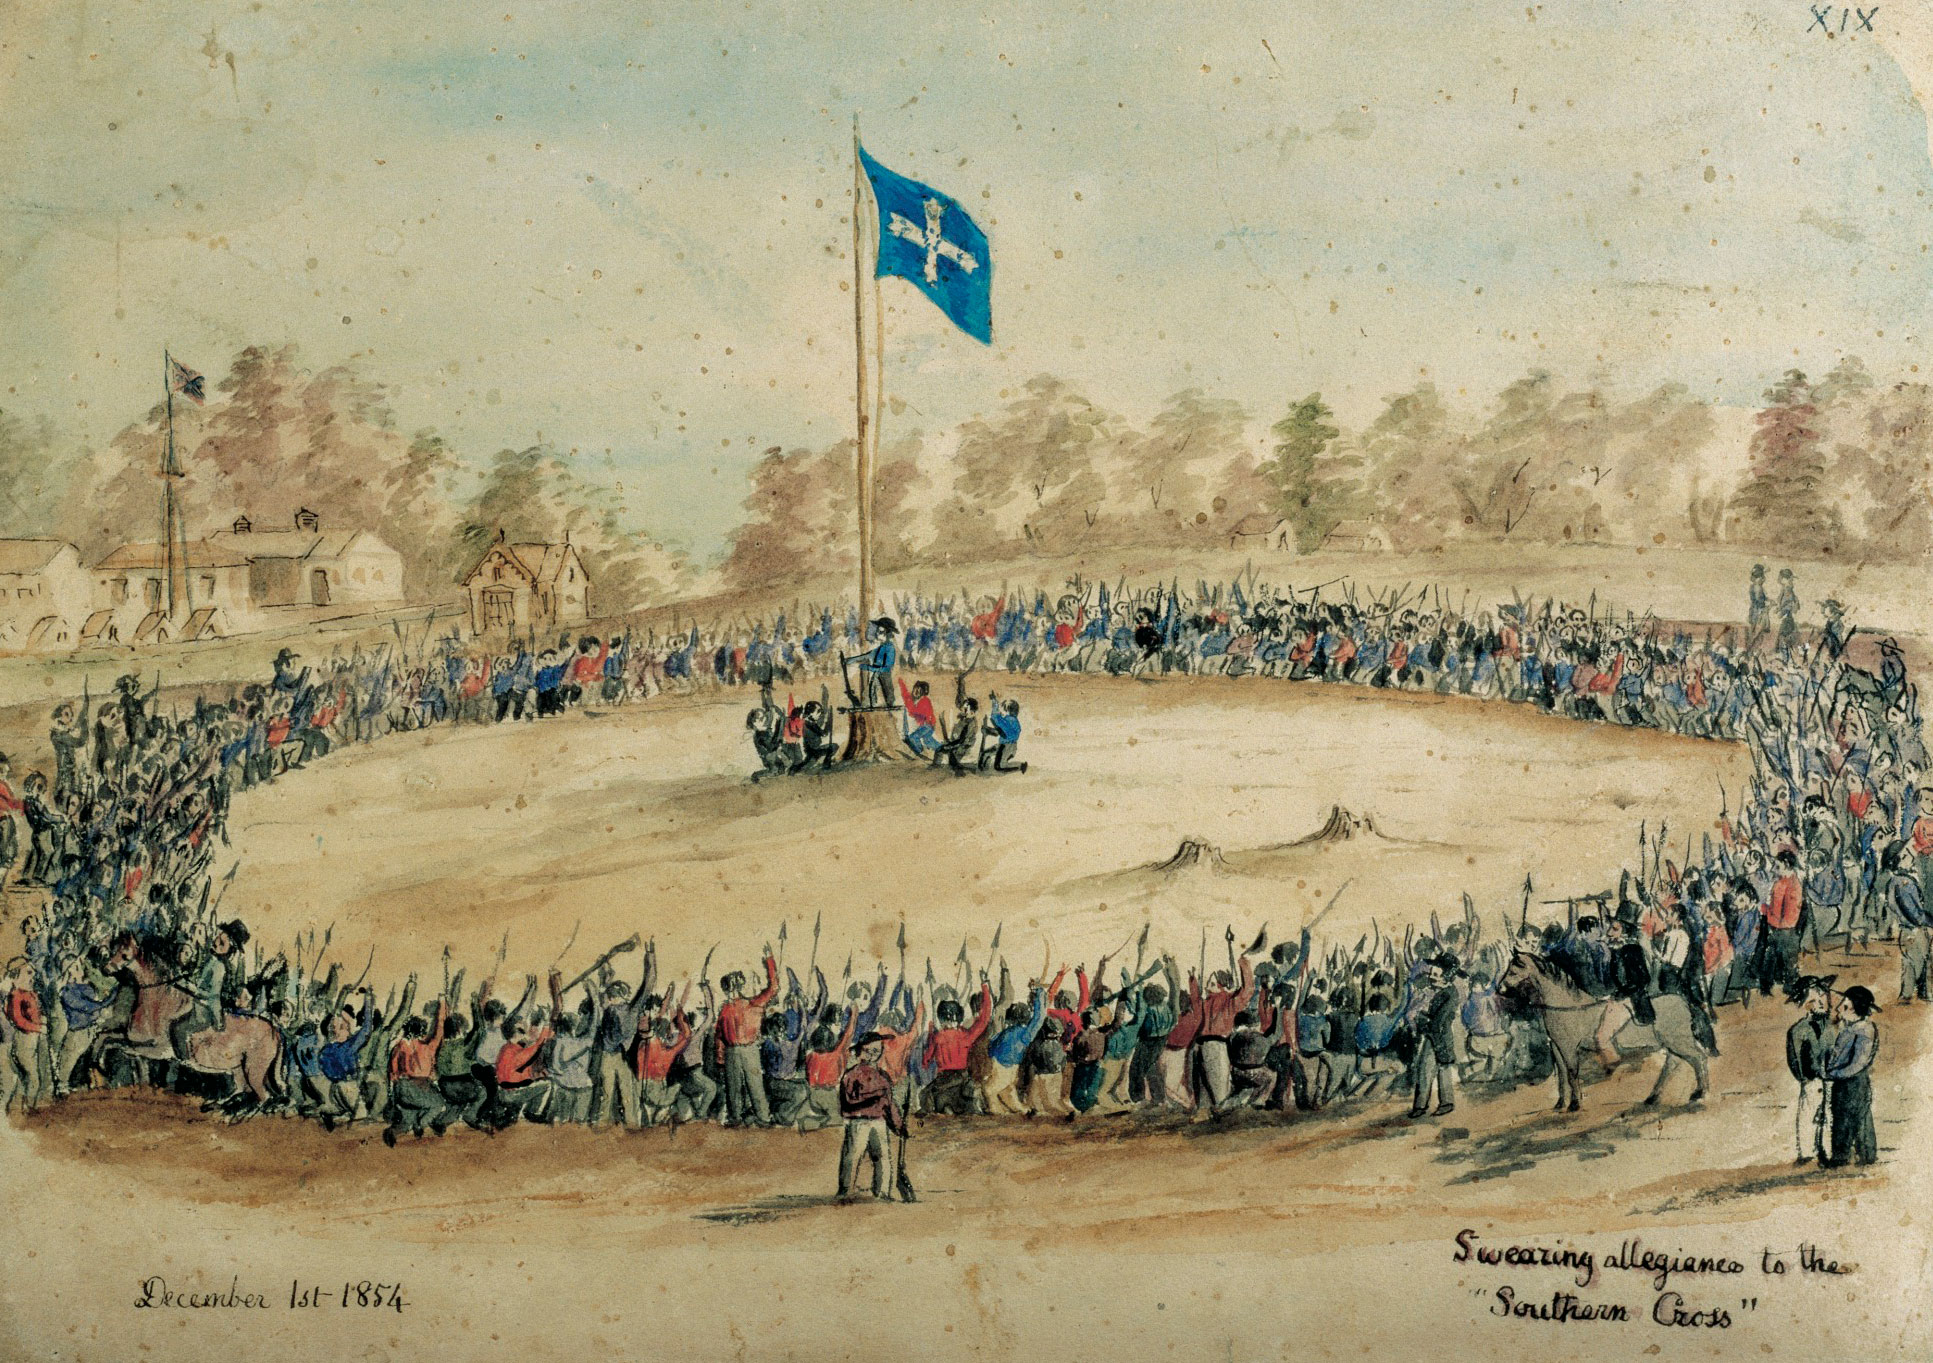 Swearing Allegiance to the Southern Cross, watercolour by Charles A Doudiet, 1 December 1854.